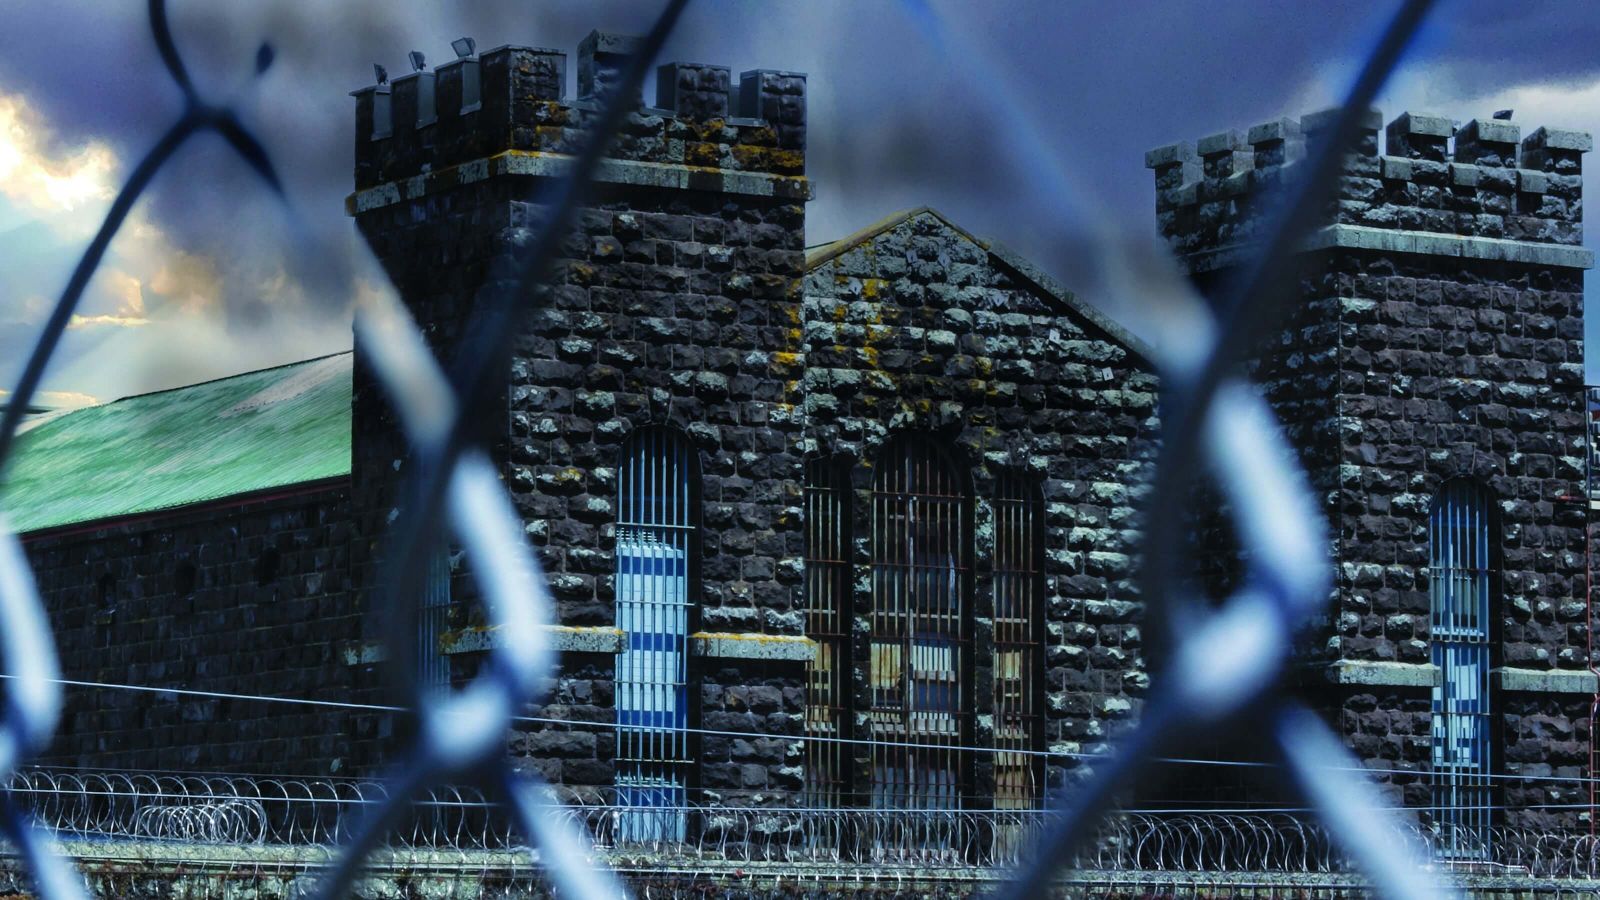 Looking through a fence at the front of a dark and grey prison building